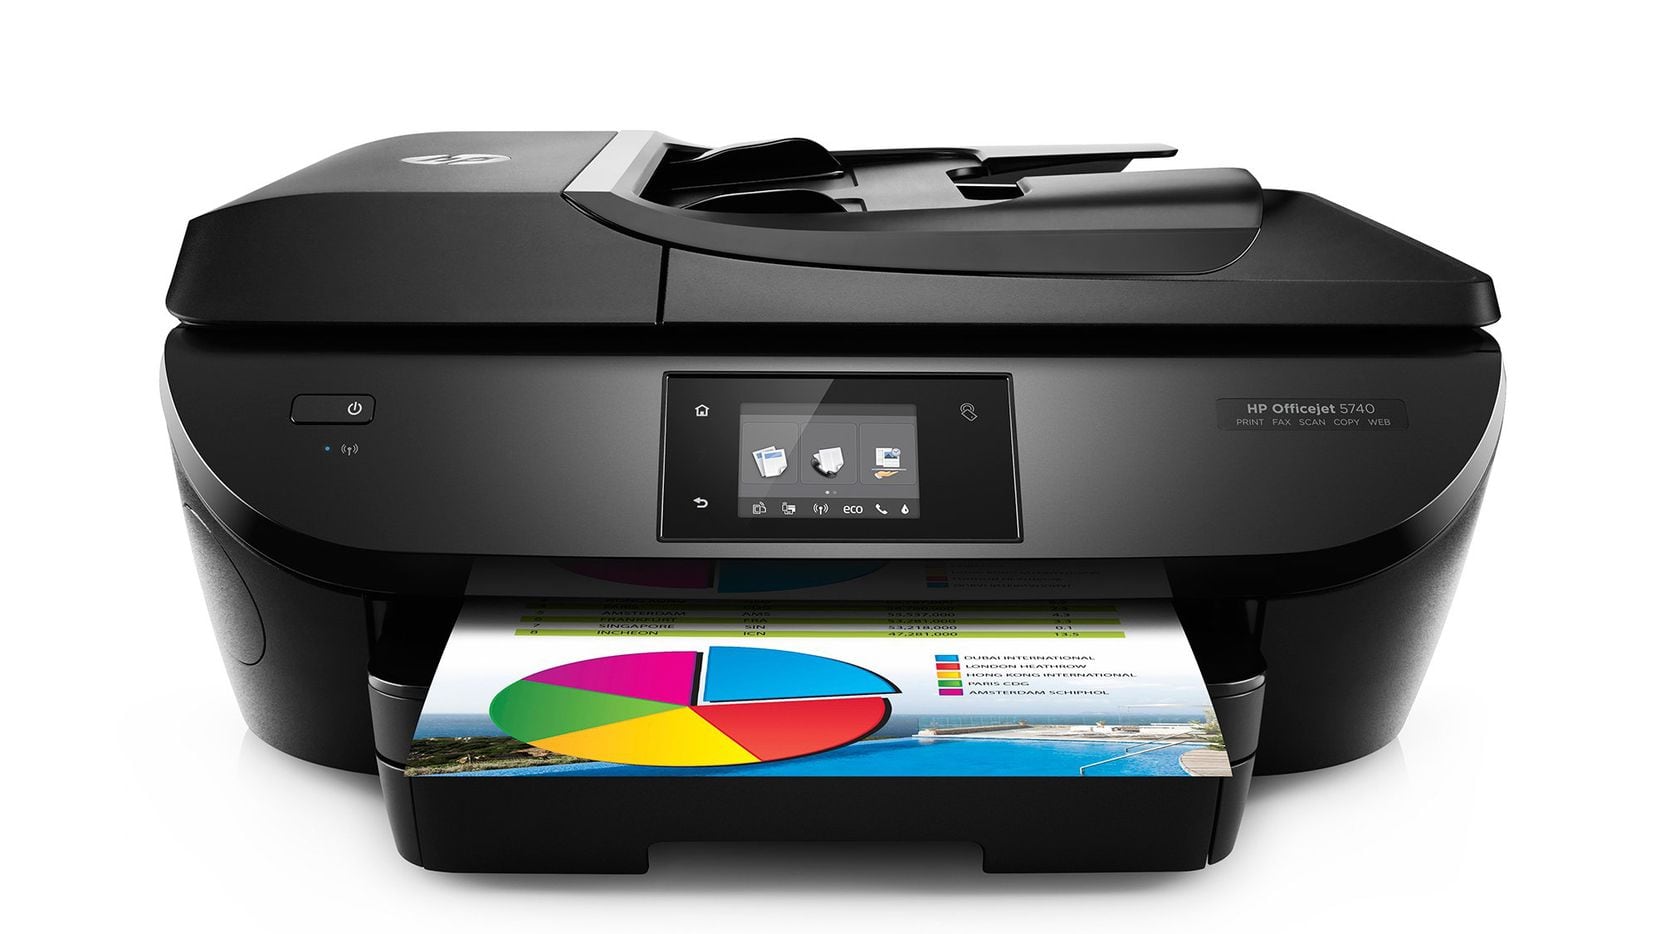 You should be able to find third-party ink for your HP printer.